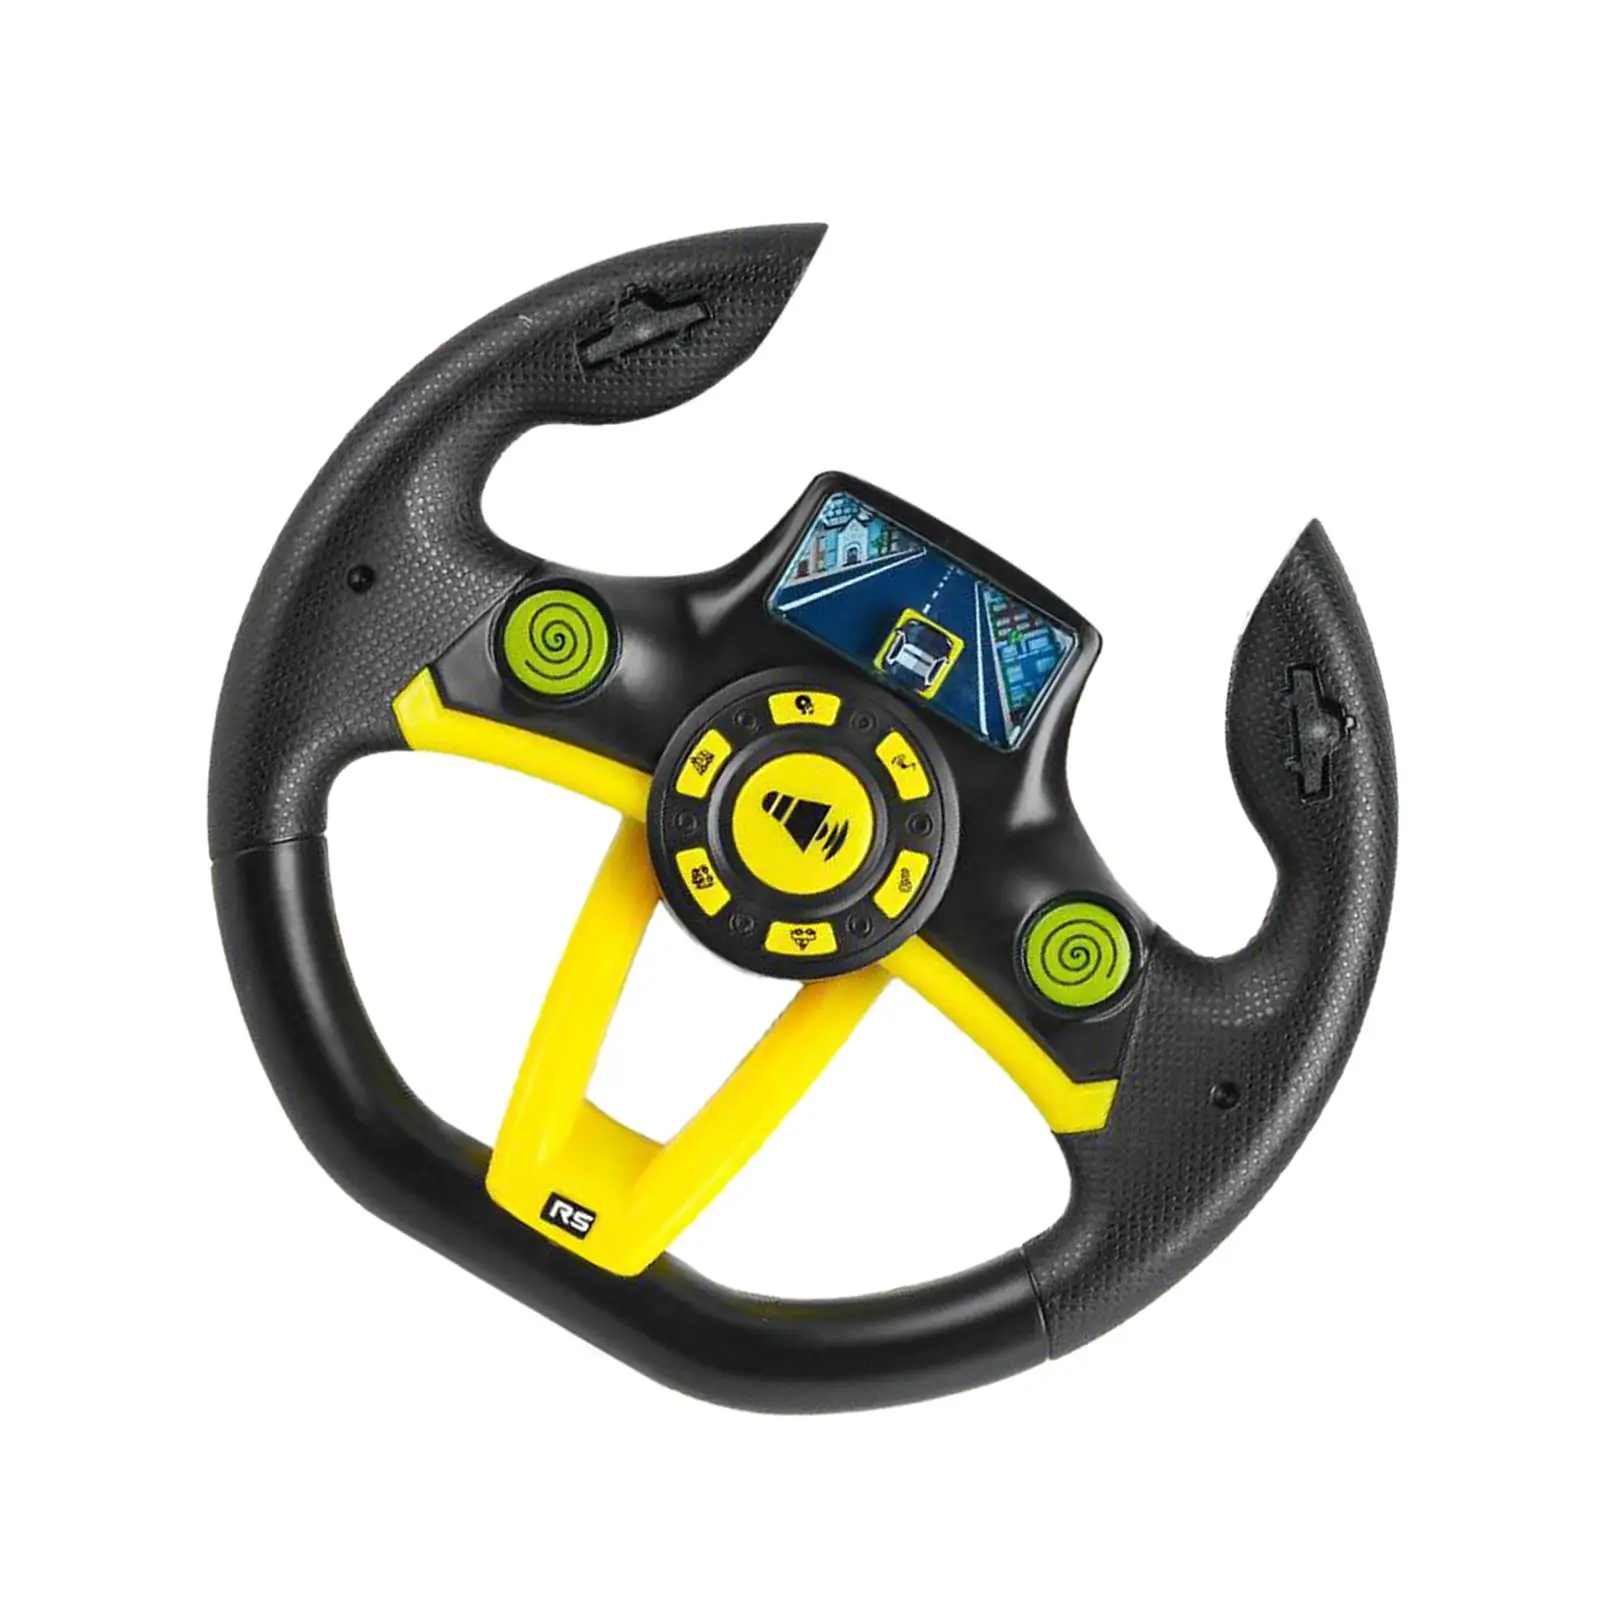 Round Steering Wheel Toy Battery Powered for Playground Busy Board Treehouse